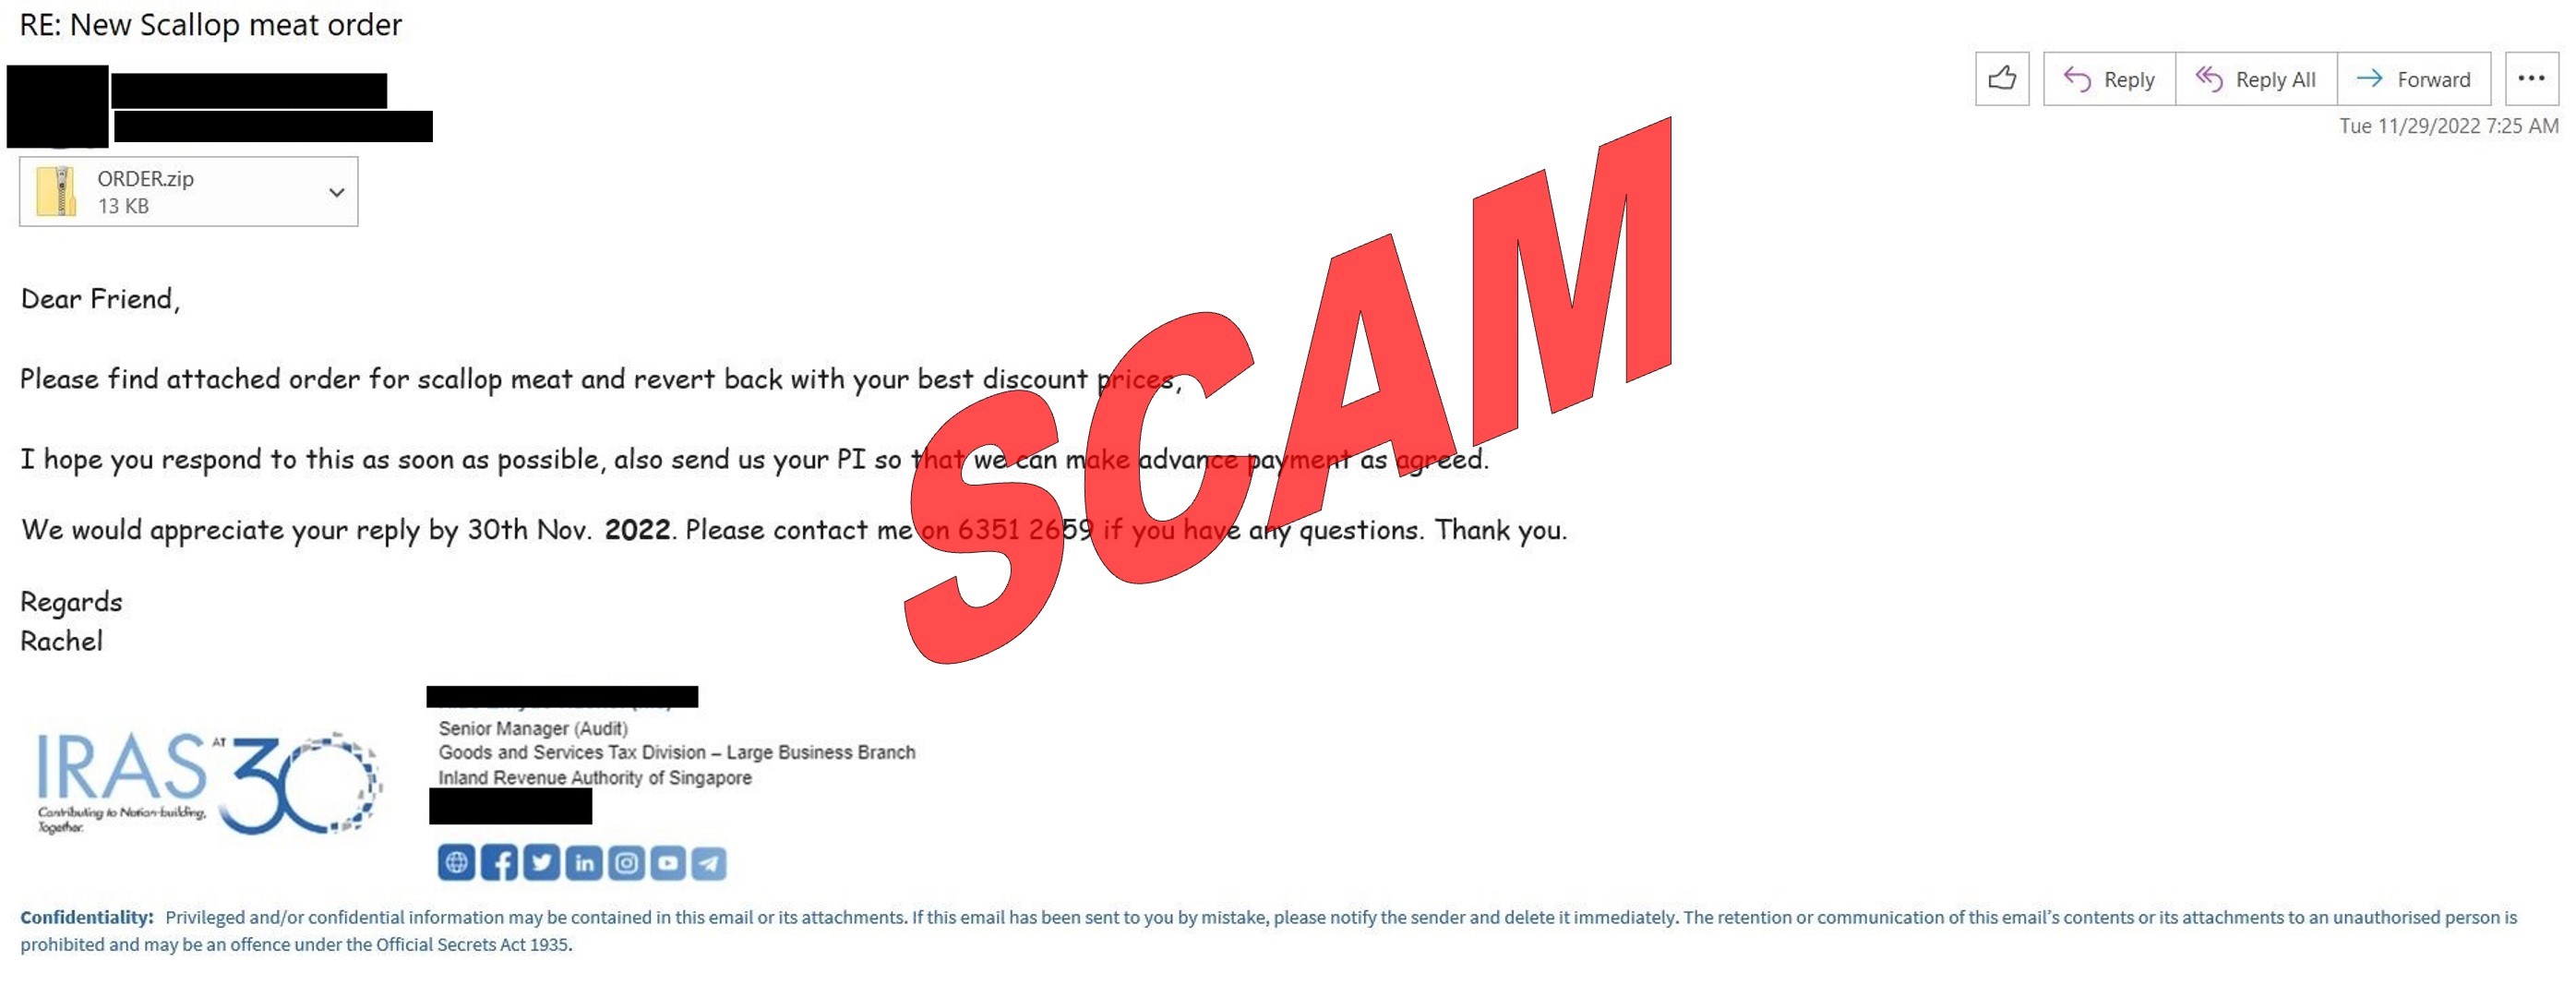 Image showing spoofed email received from IRAS to deceive recipients into thinking that the message came from an IRAS officer containing malicious content